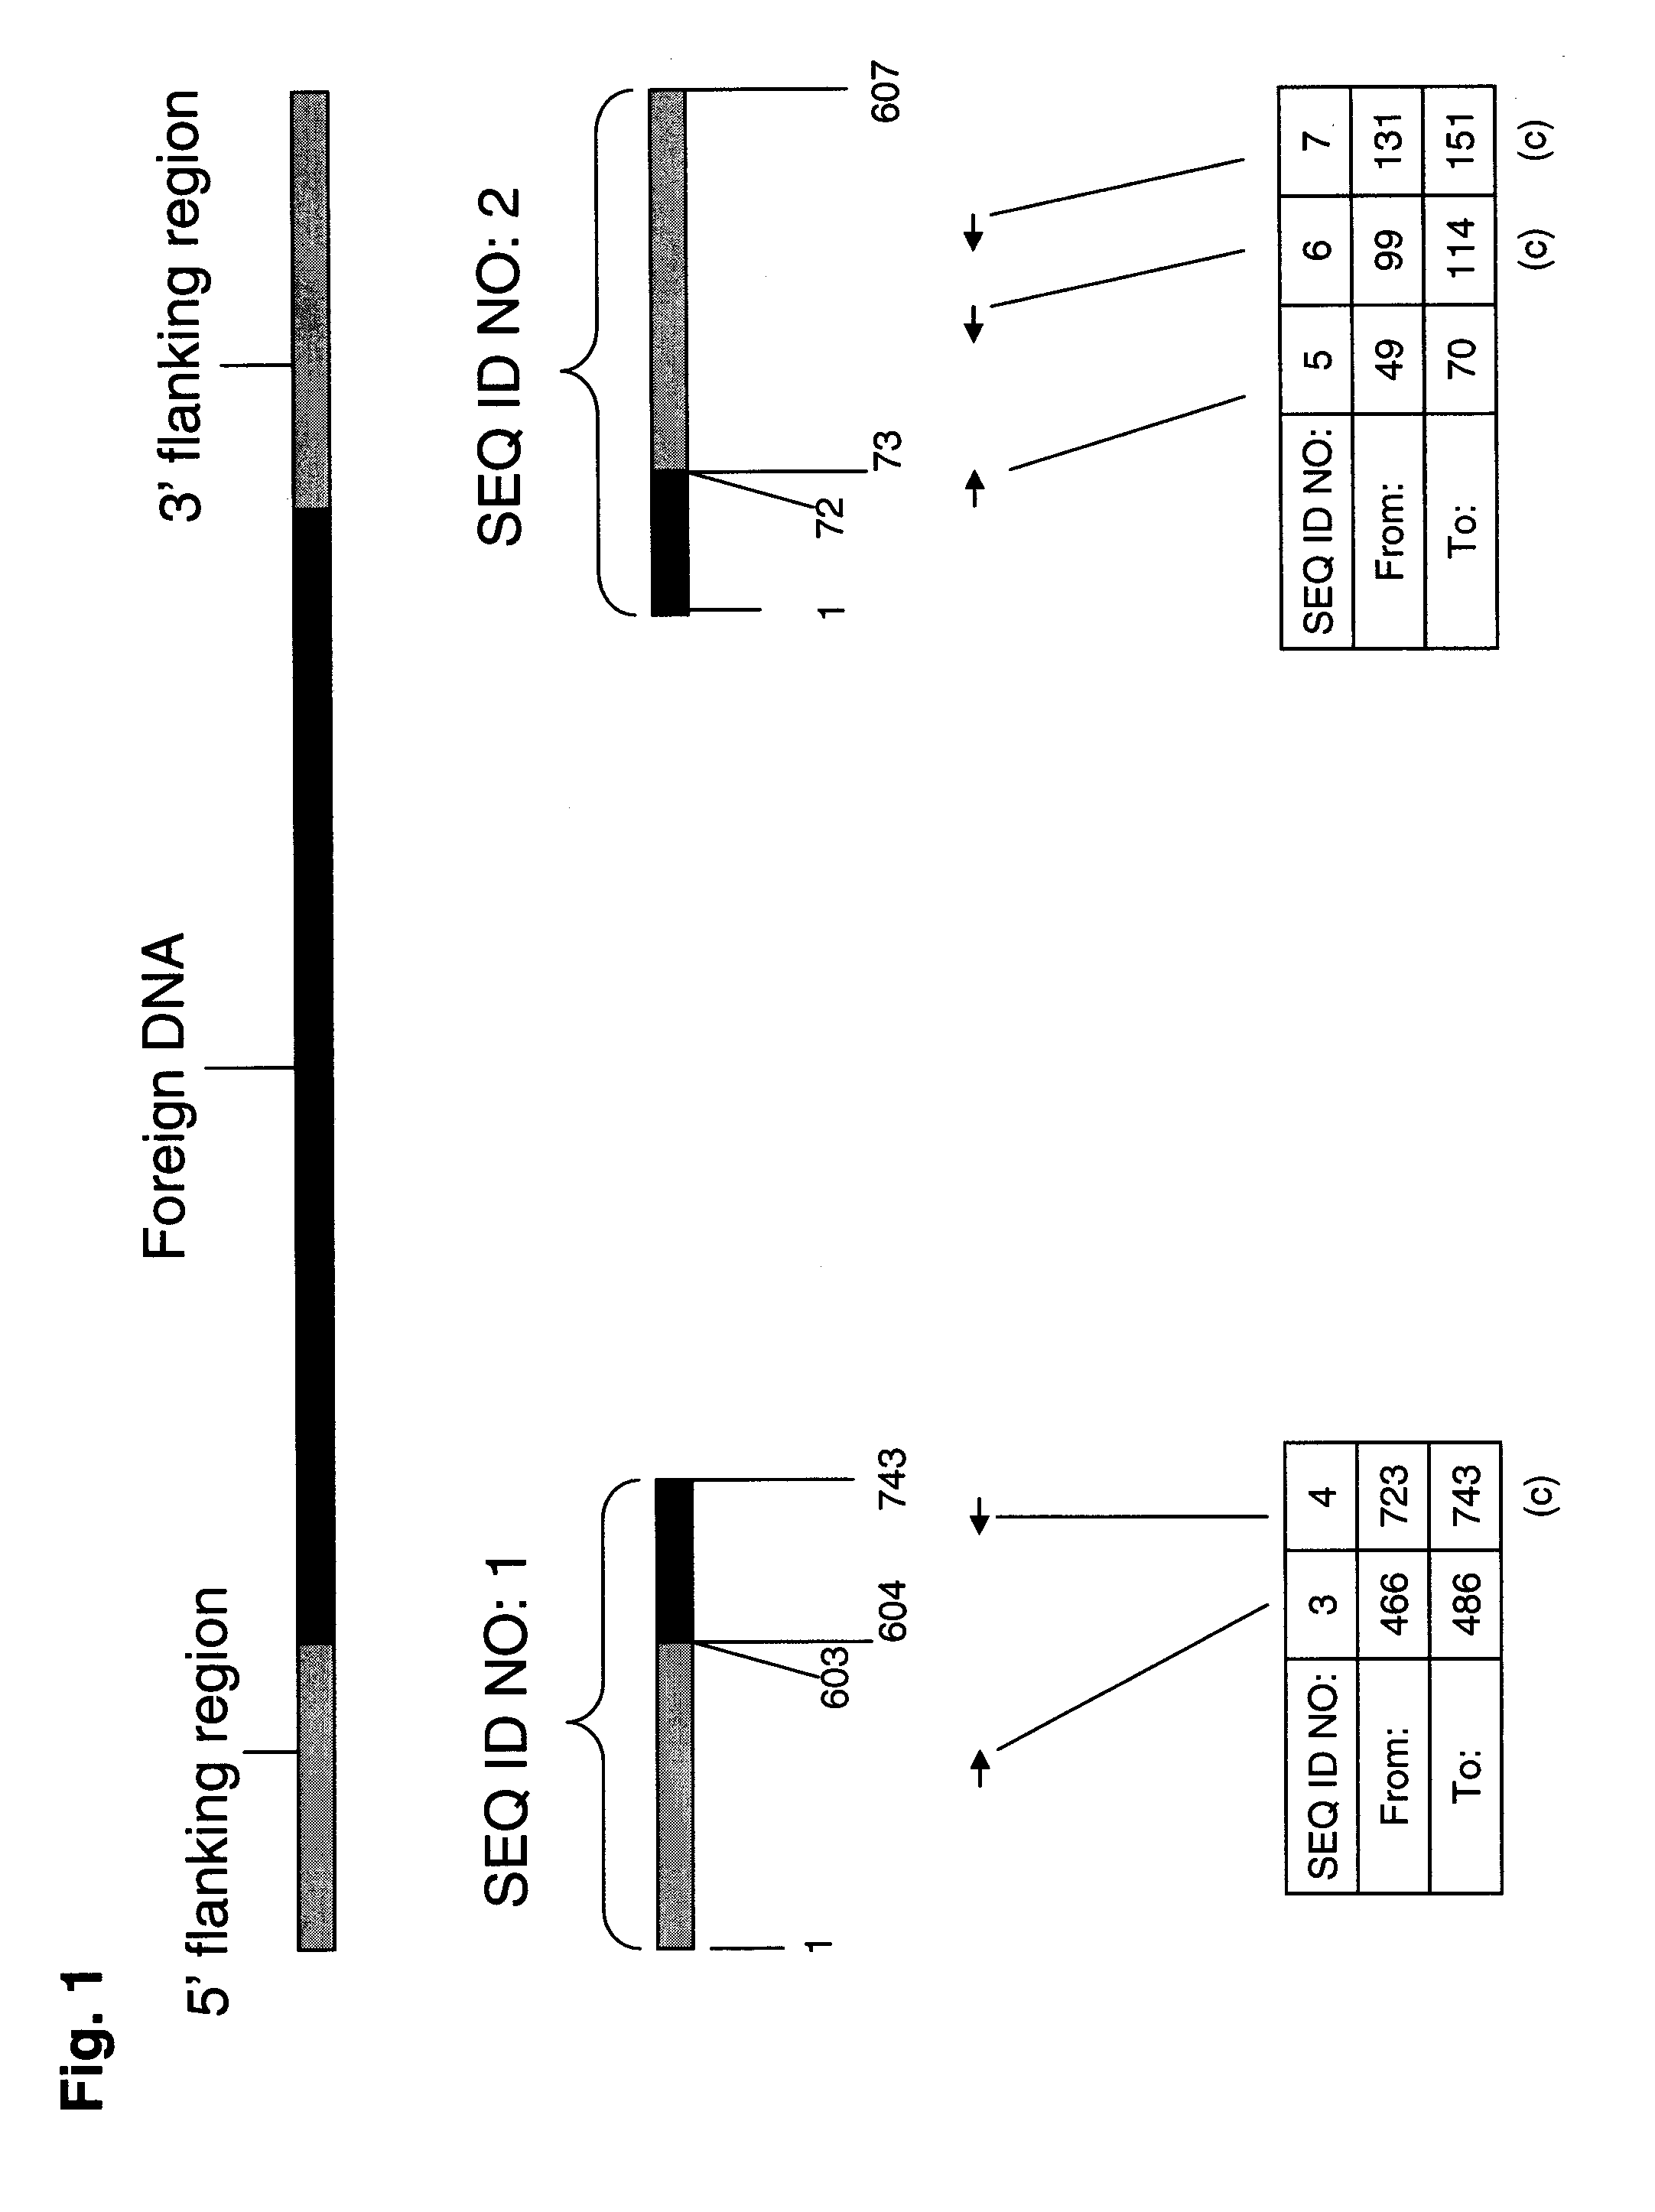 Herbicide tolerant rice plants and methods for identifying same